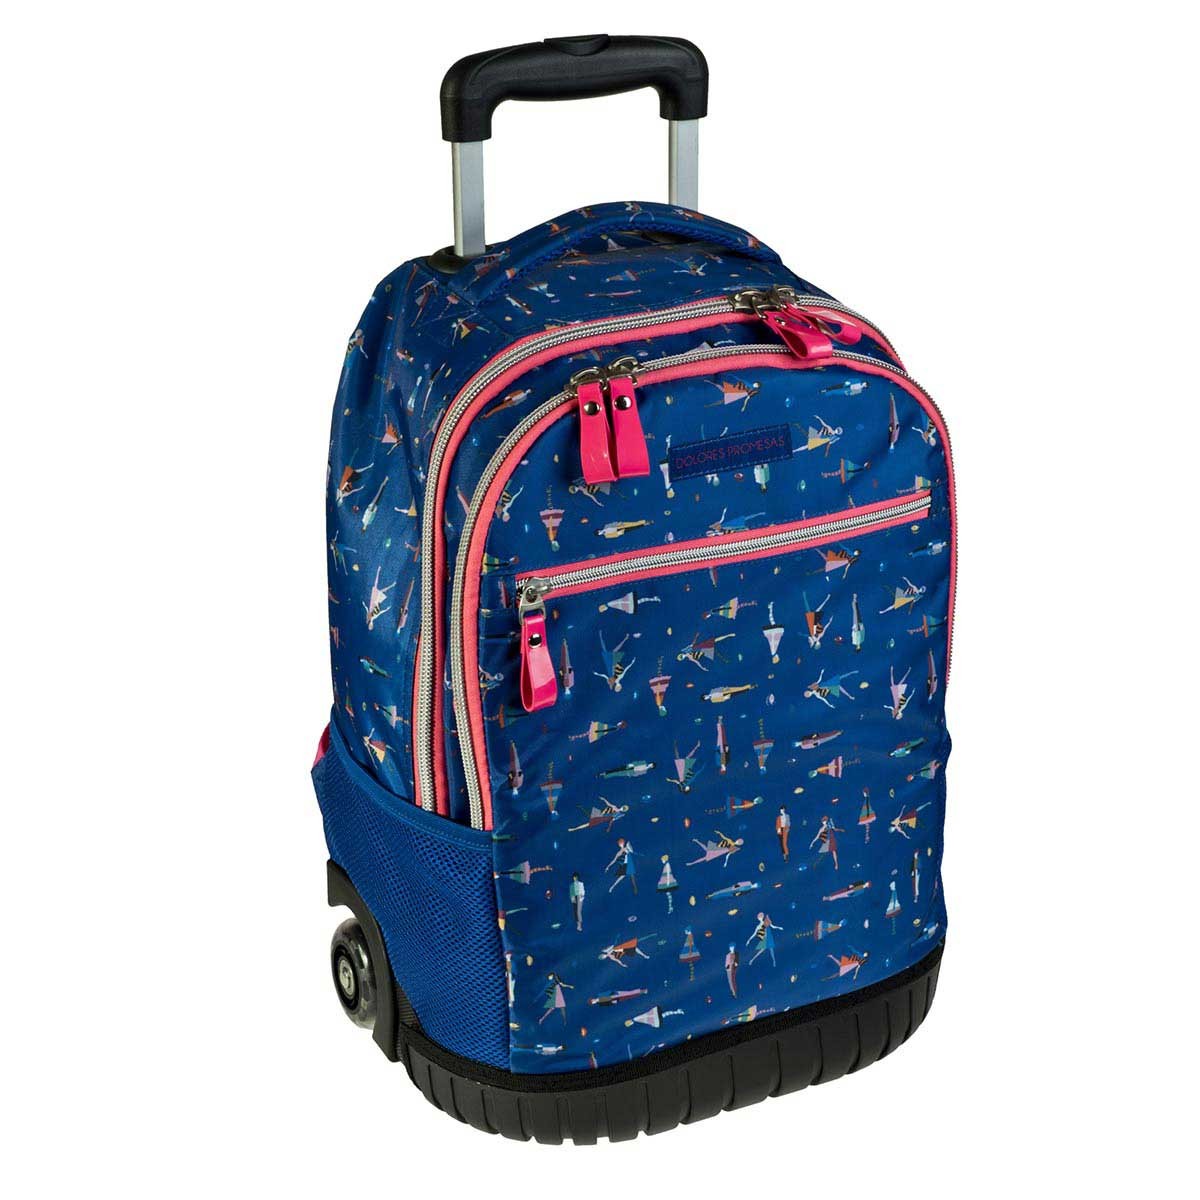 DOLORES PROMESAS DOUBLE BACKPACK TROLLEY 30X45X20CM